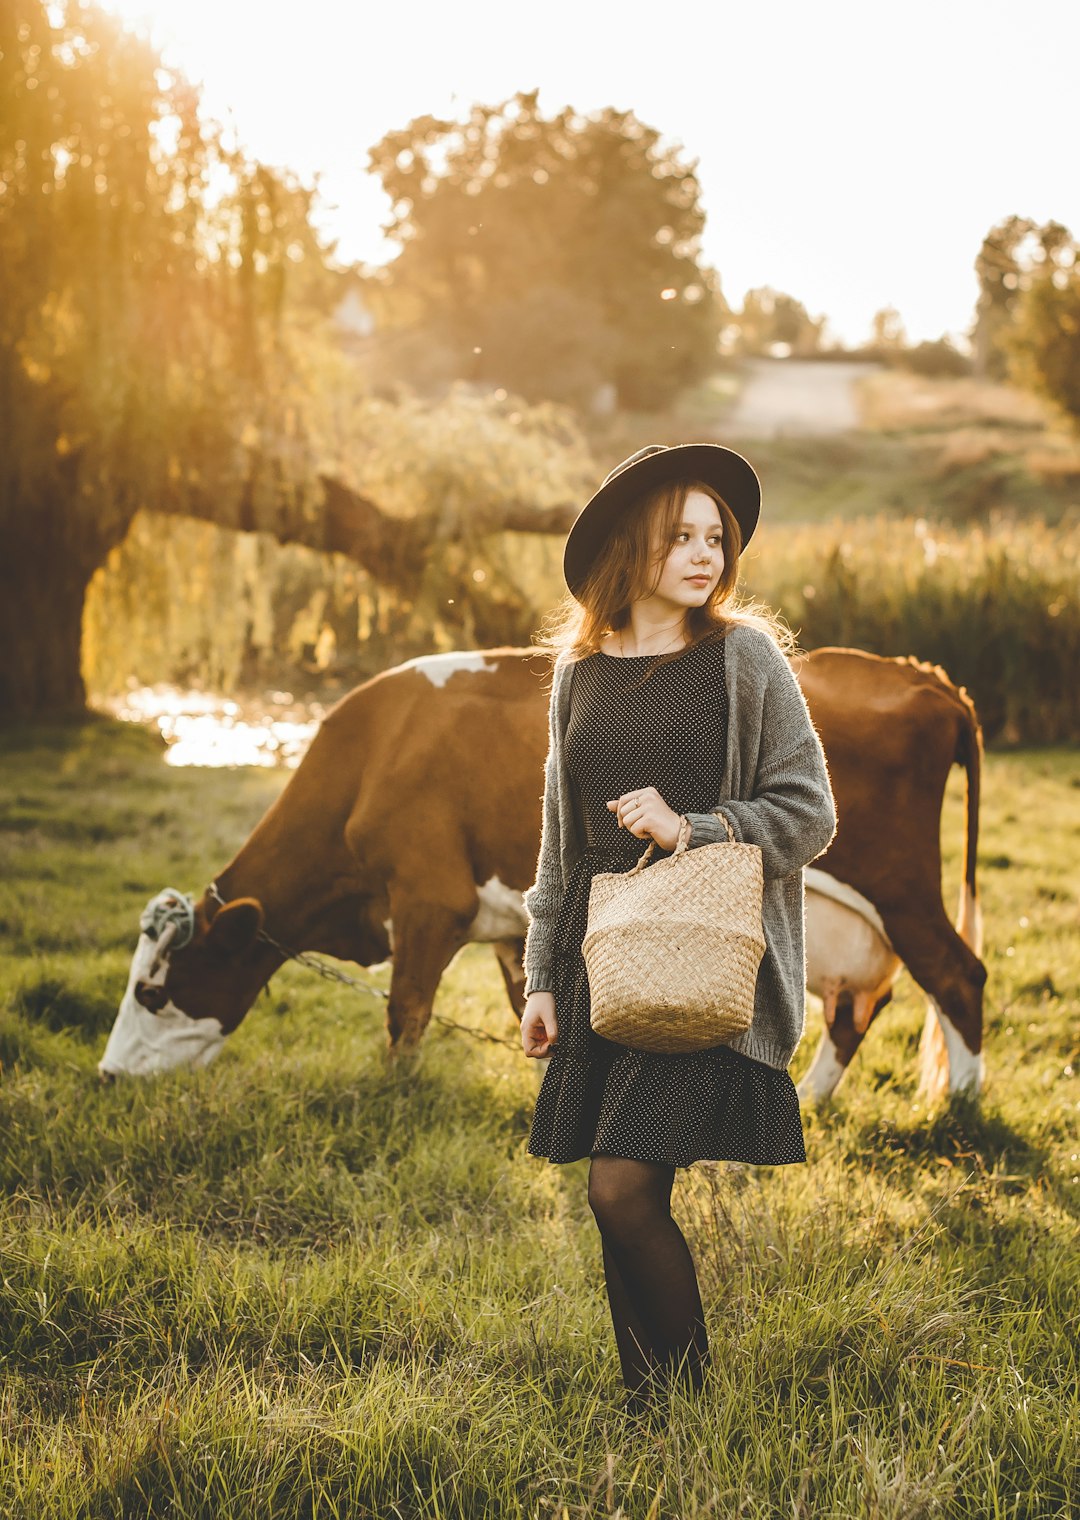 girl in gray sweater standing beside brown and white cow on green grass field during daytime